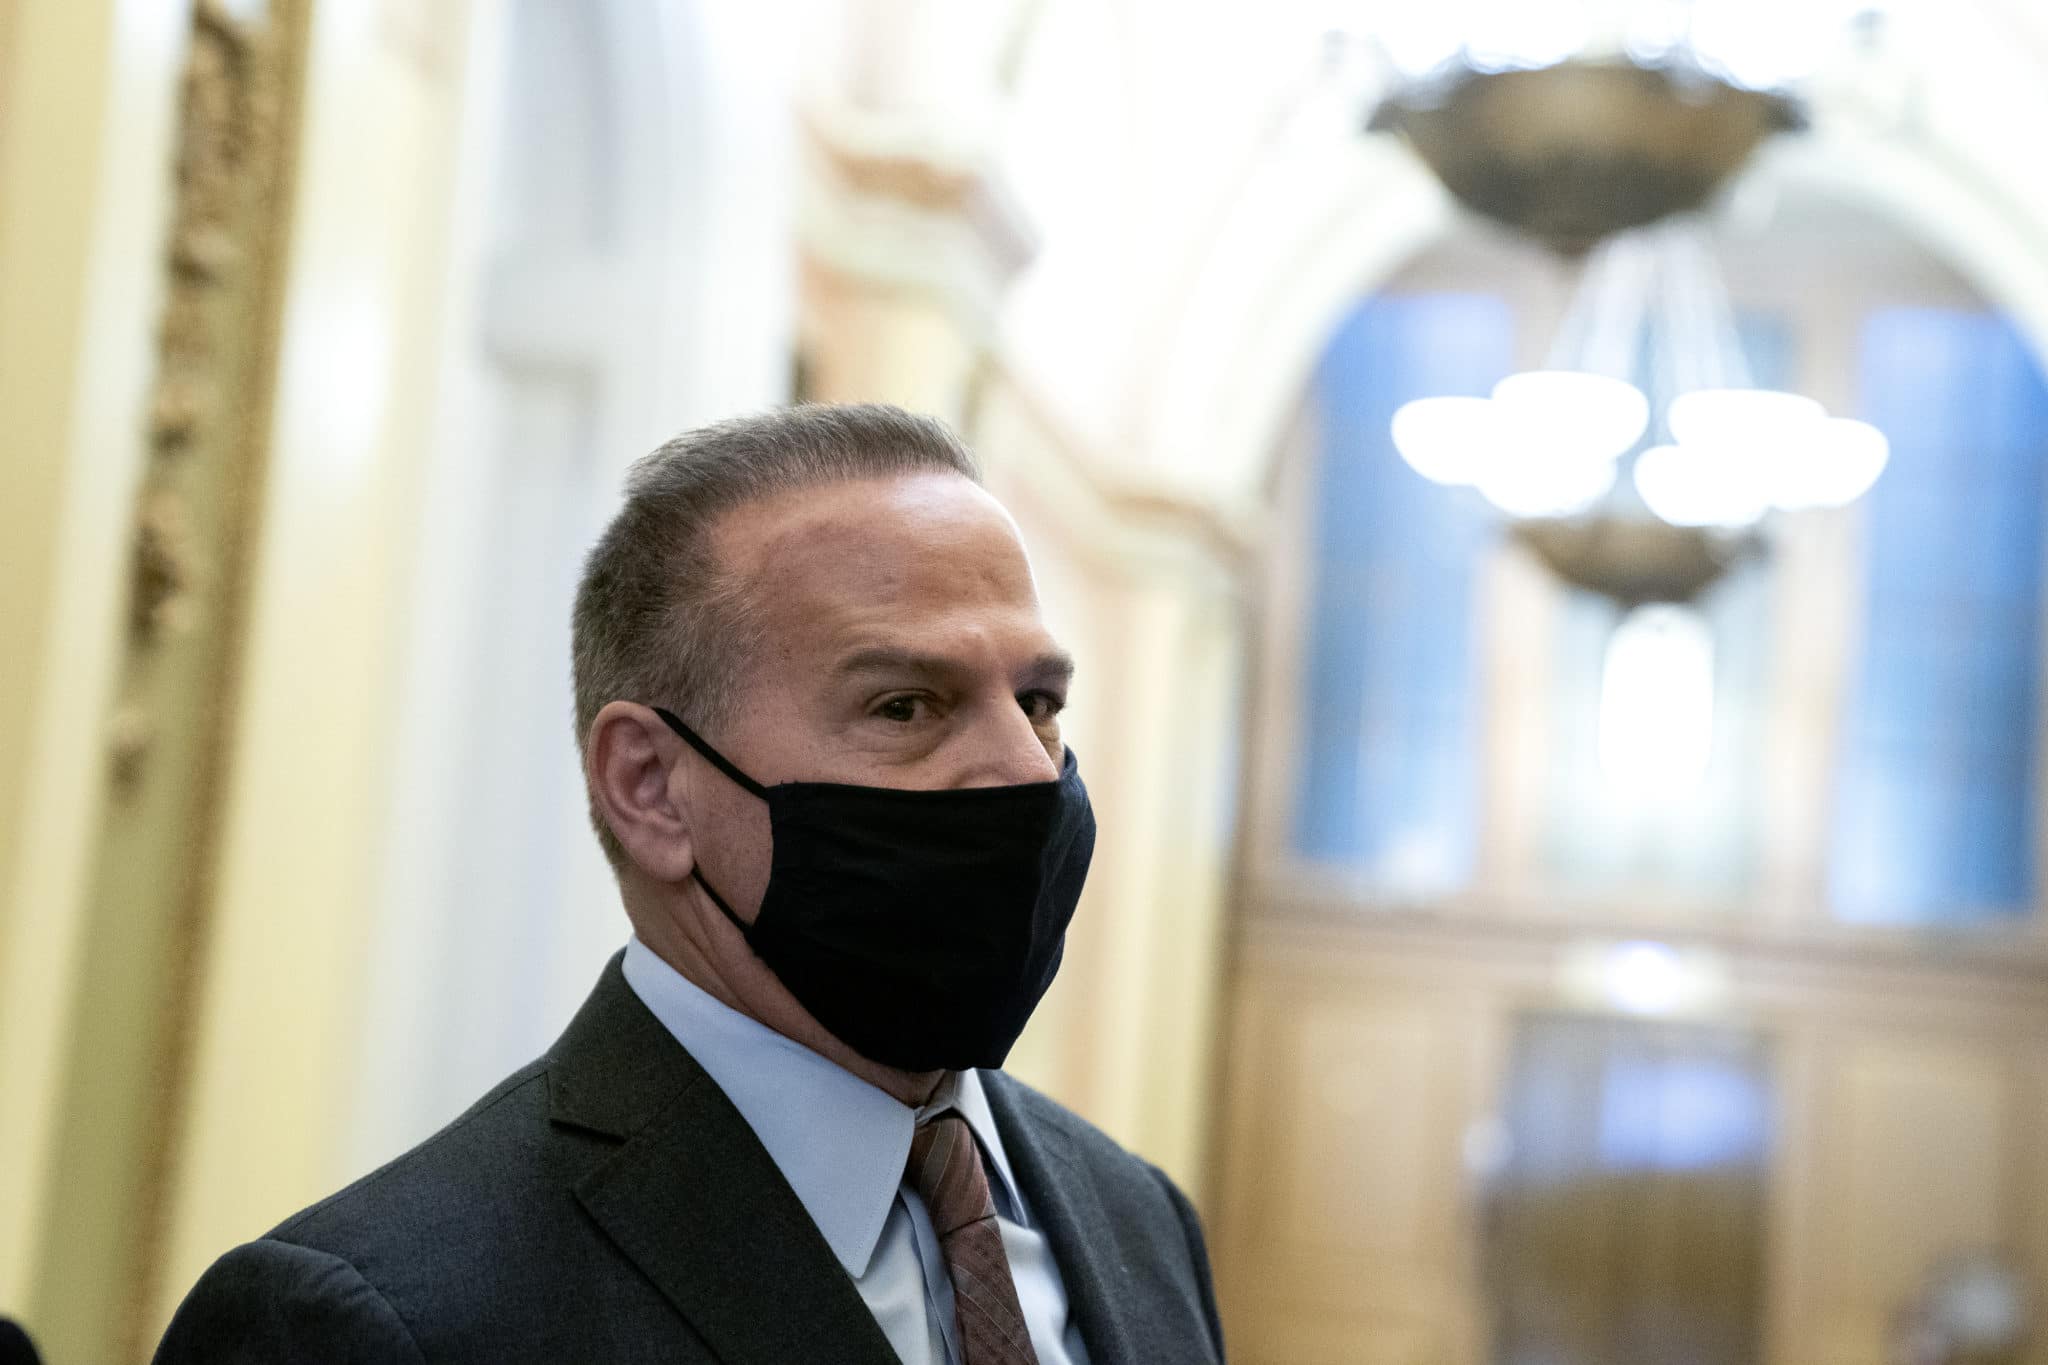 Trump impeachment: Rep. David Cicilline wears a protective mask while speaking to reporters at the US Capitol on January 11, 2021 